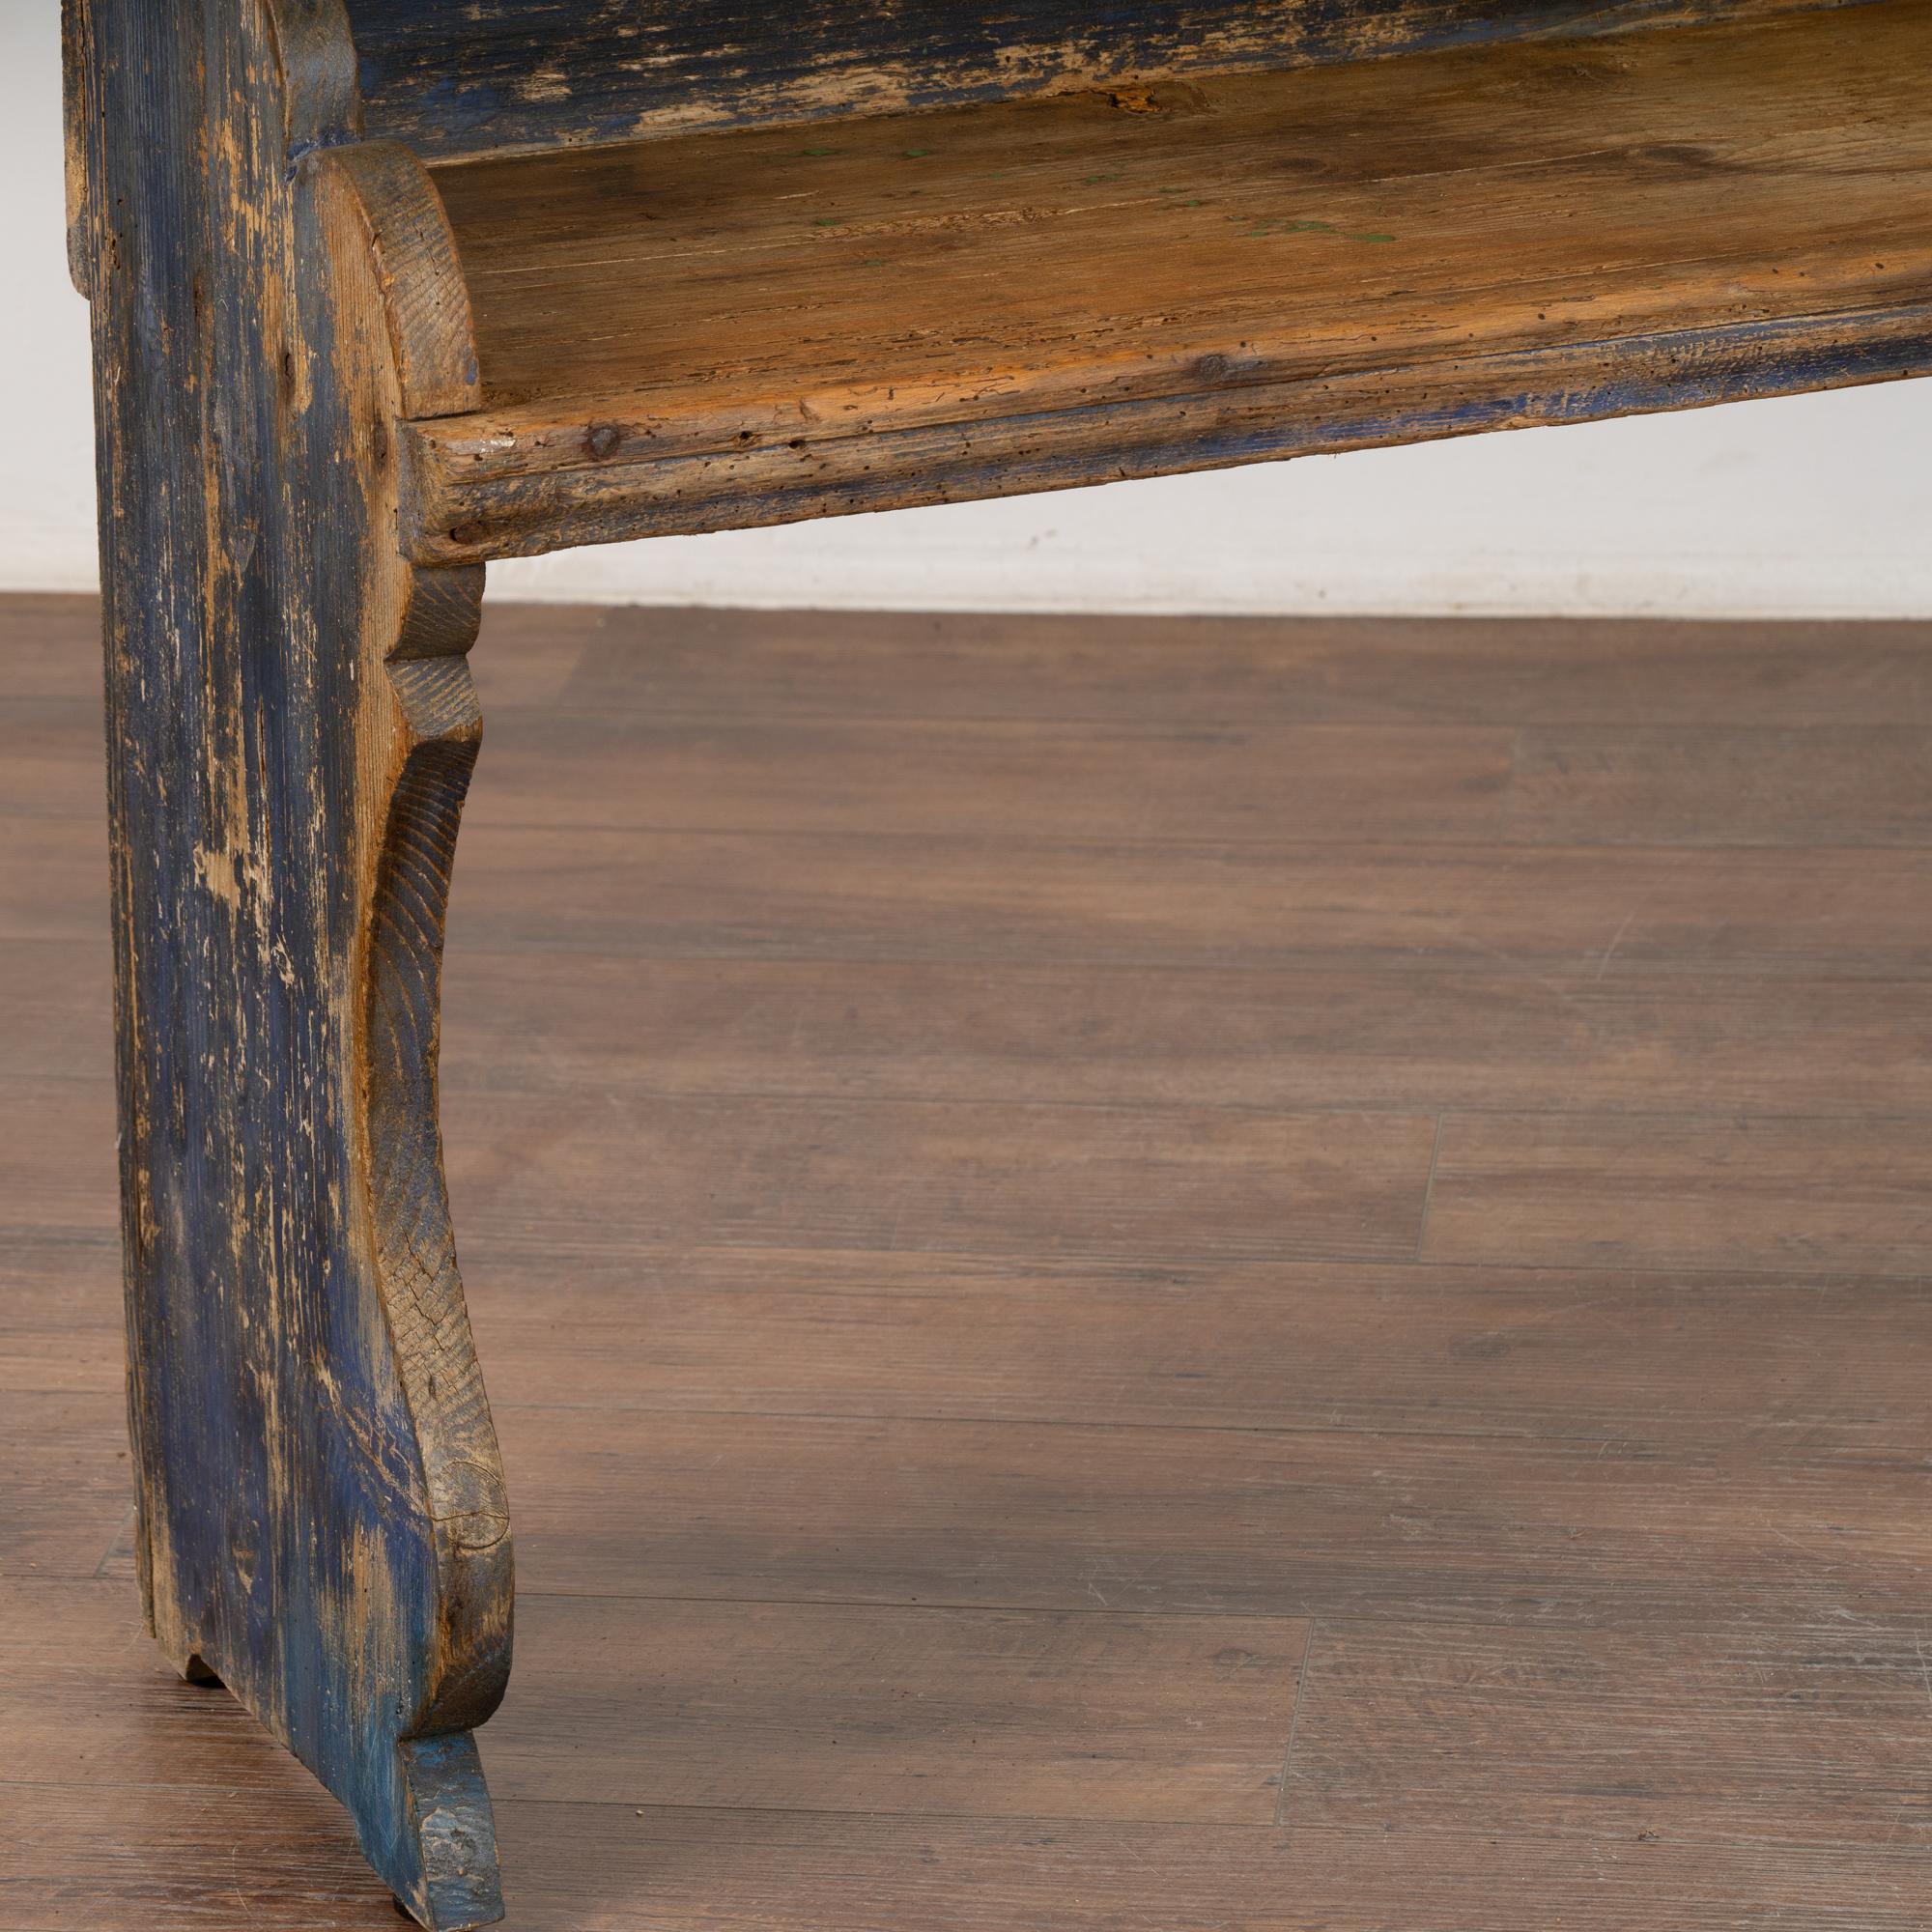 Original Blue Painted Narrow Pine Bench, Hungary dated 1885 For Sale 2